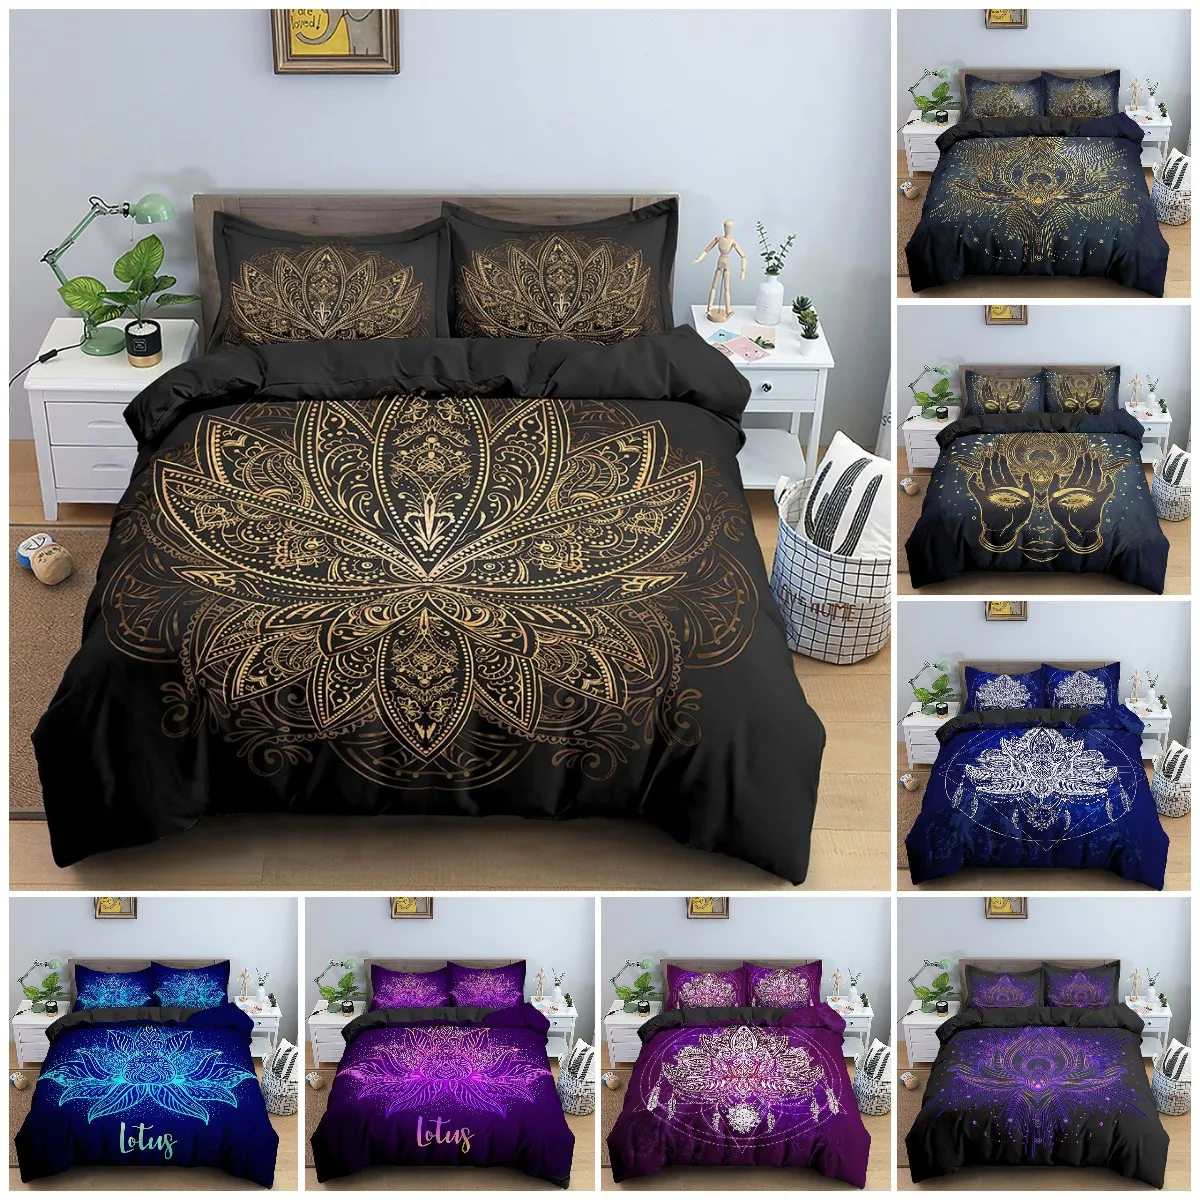 Lotus Duvet Cover Set Mandala Lotus Pattern Twin Bedding Set Chic Exotic Boho Style for Teens Adults Queen King Size Quilt Cover